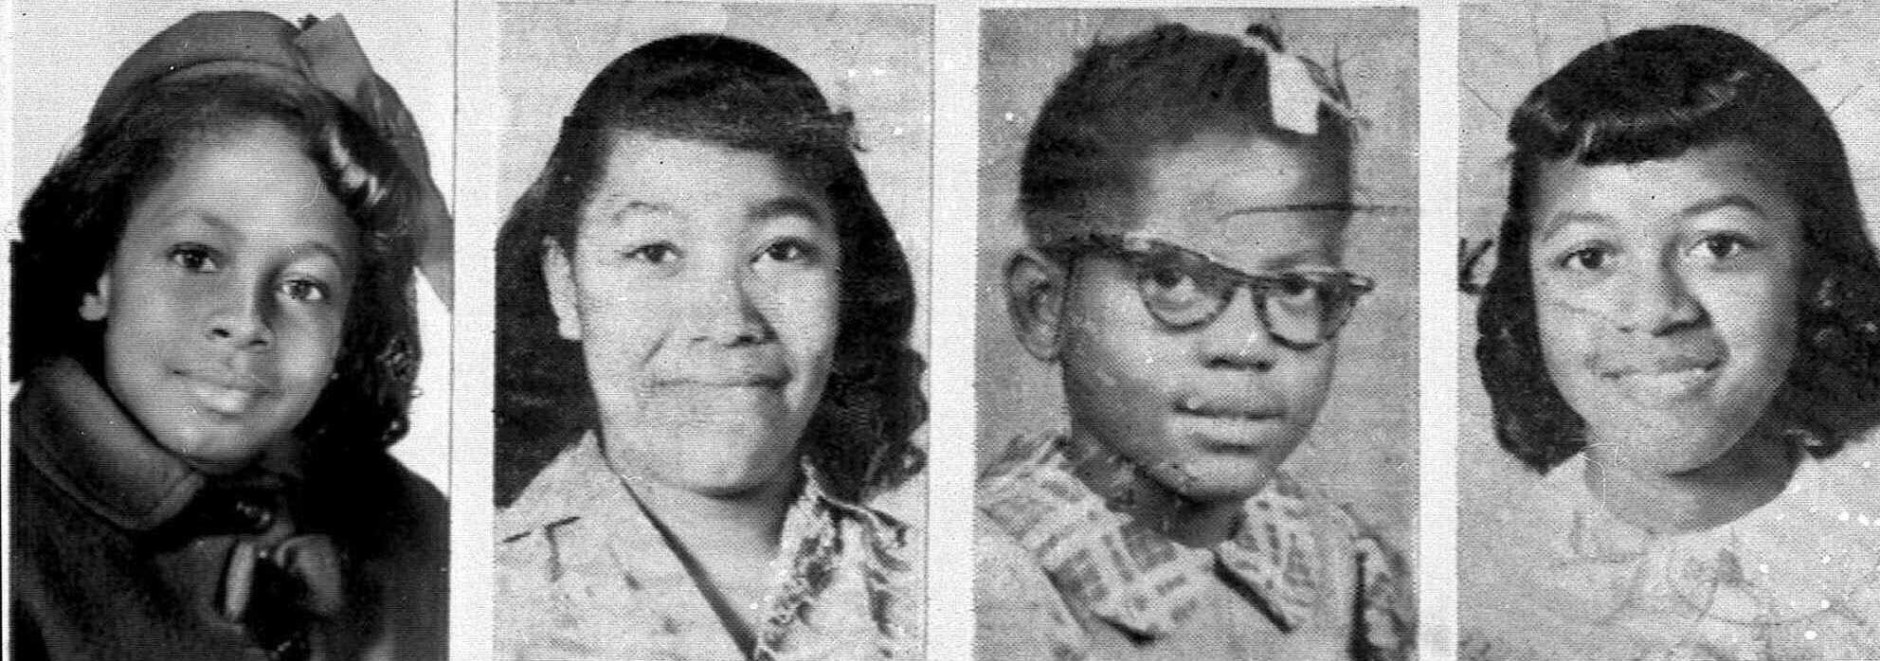 Denise McNair, 11; Carole Robertson, 14; Addie Mae Collins, 14;  and Cynthia Wesley, 14; from left, are shown in these 1963 photos. A former Ku Klux Klansman, Thomas Blanton Jr., 62,  was convicted of murder Tuesday, May 1, 2001, for the Sixteenth Street Baptist Church bombing that killed the four girls on Sept. 15, 1963.  (AP Photo)